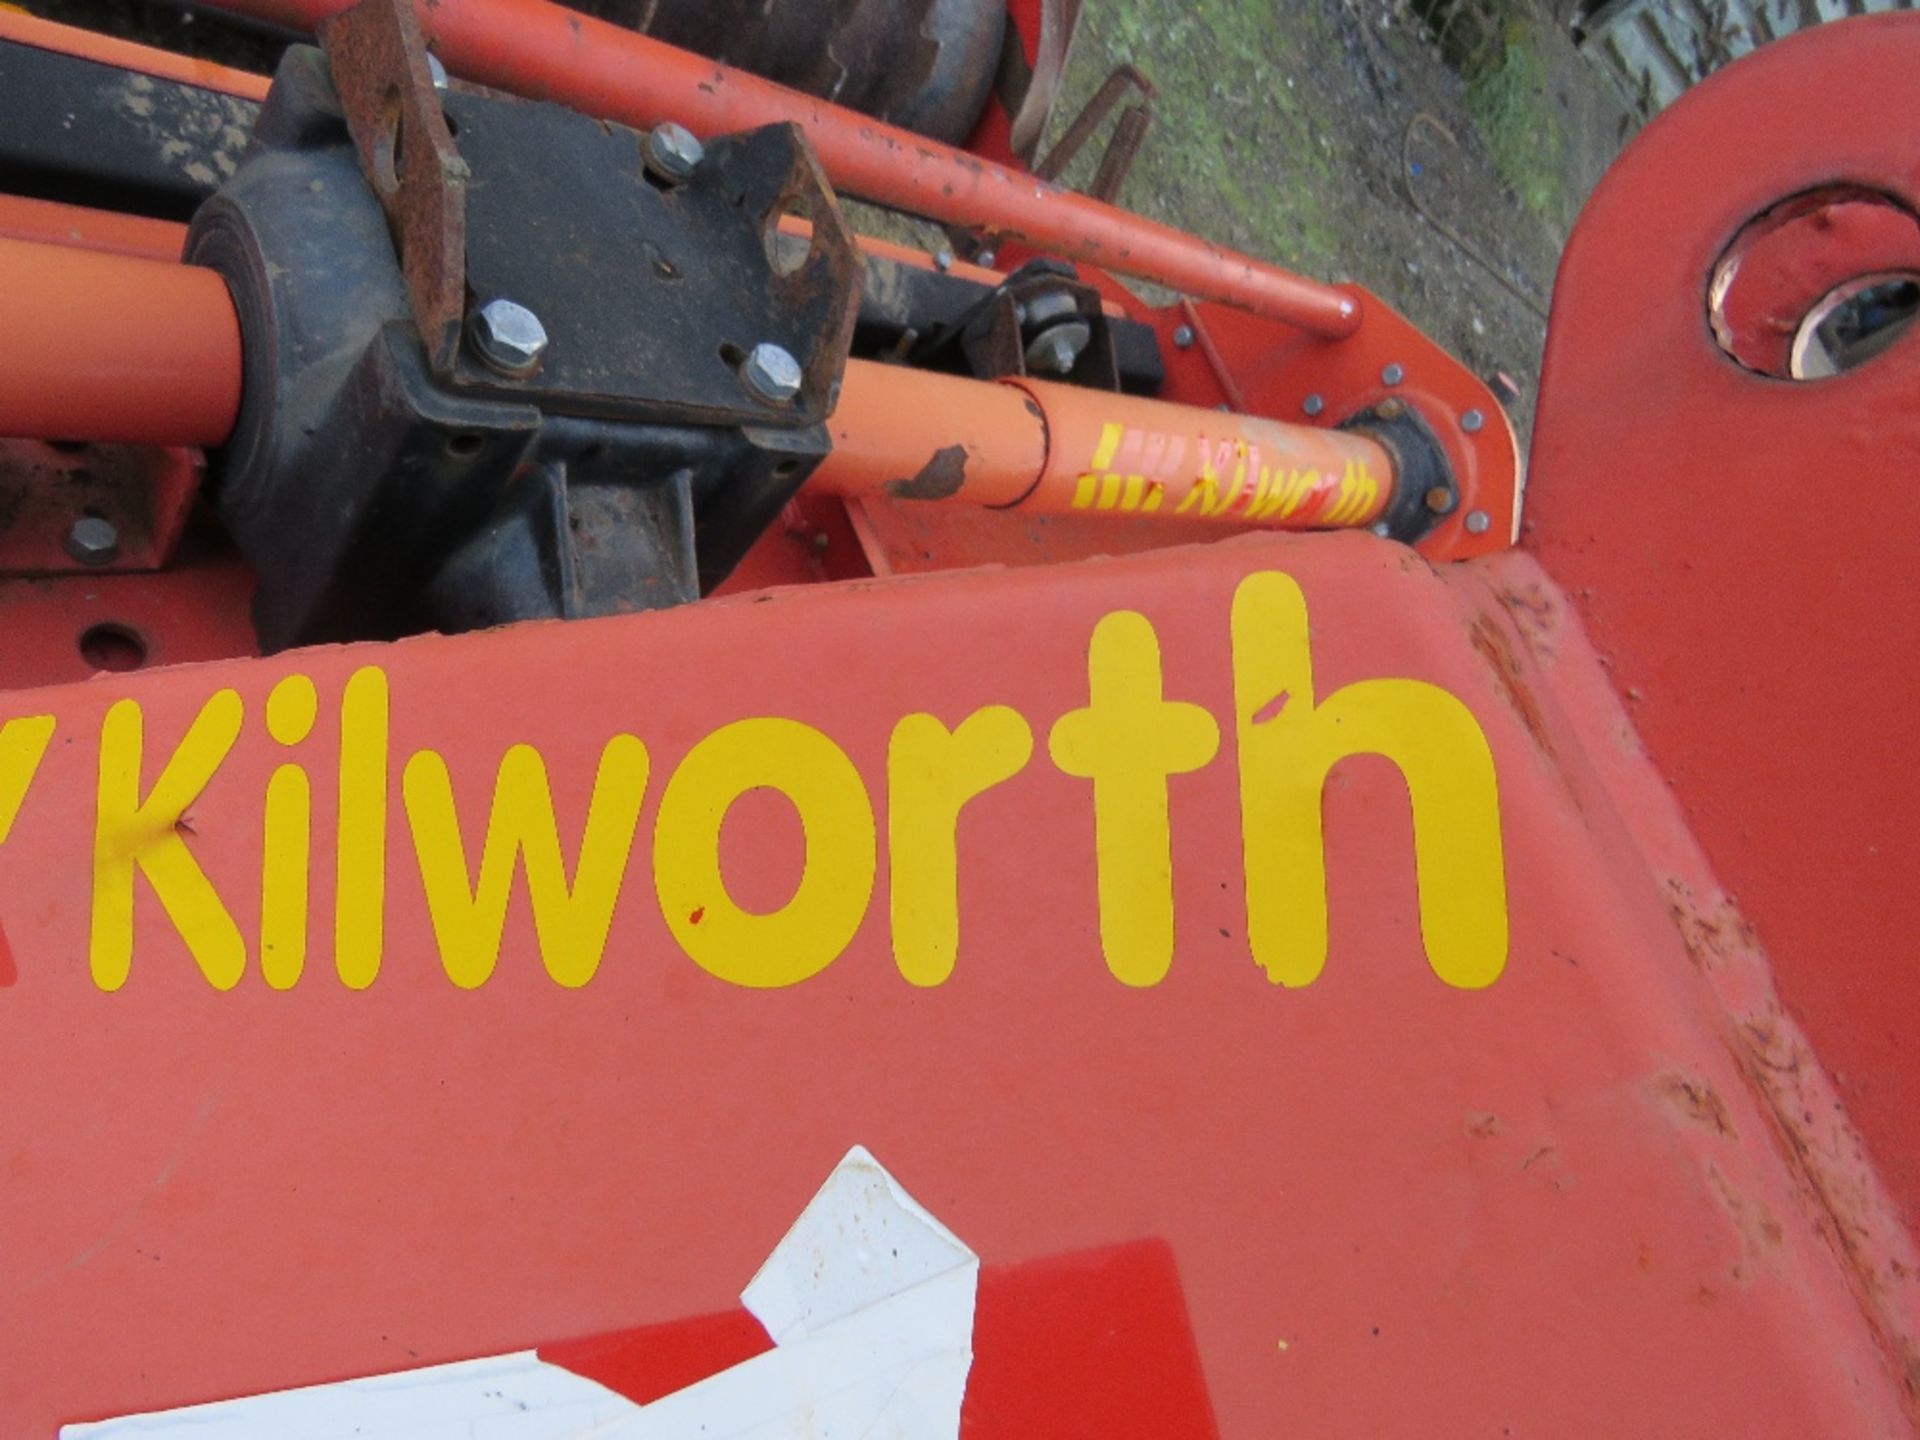 KILWORTH 170M TRACTOR MOUNTED STONE BURIER / ROTORVATOR, YEAR 2009 WITH REAR PACKER ROLLER. - Image 7 of 8